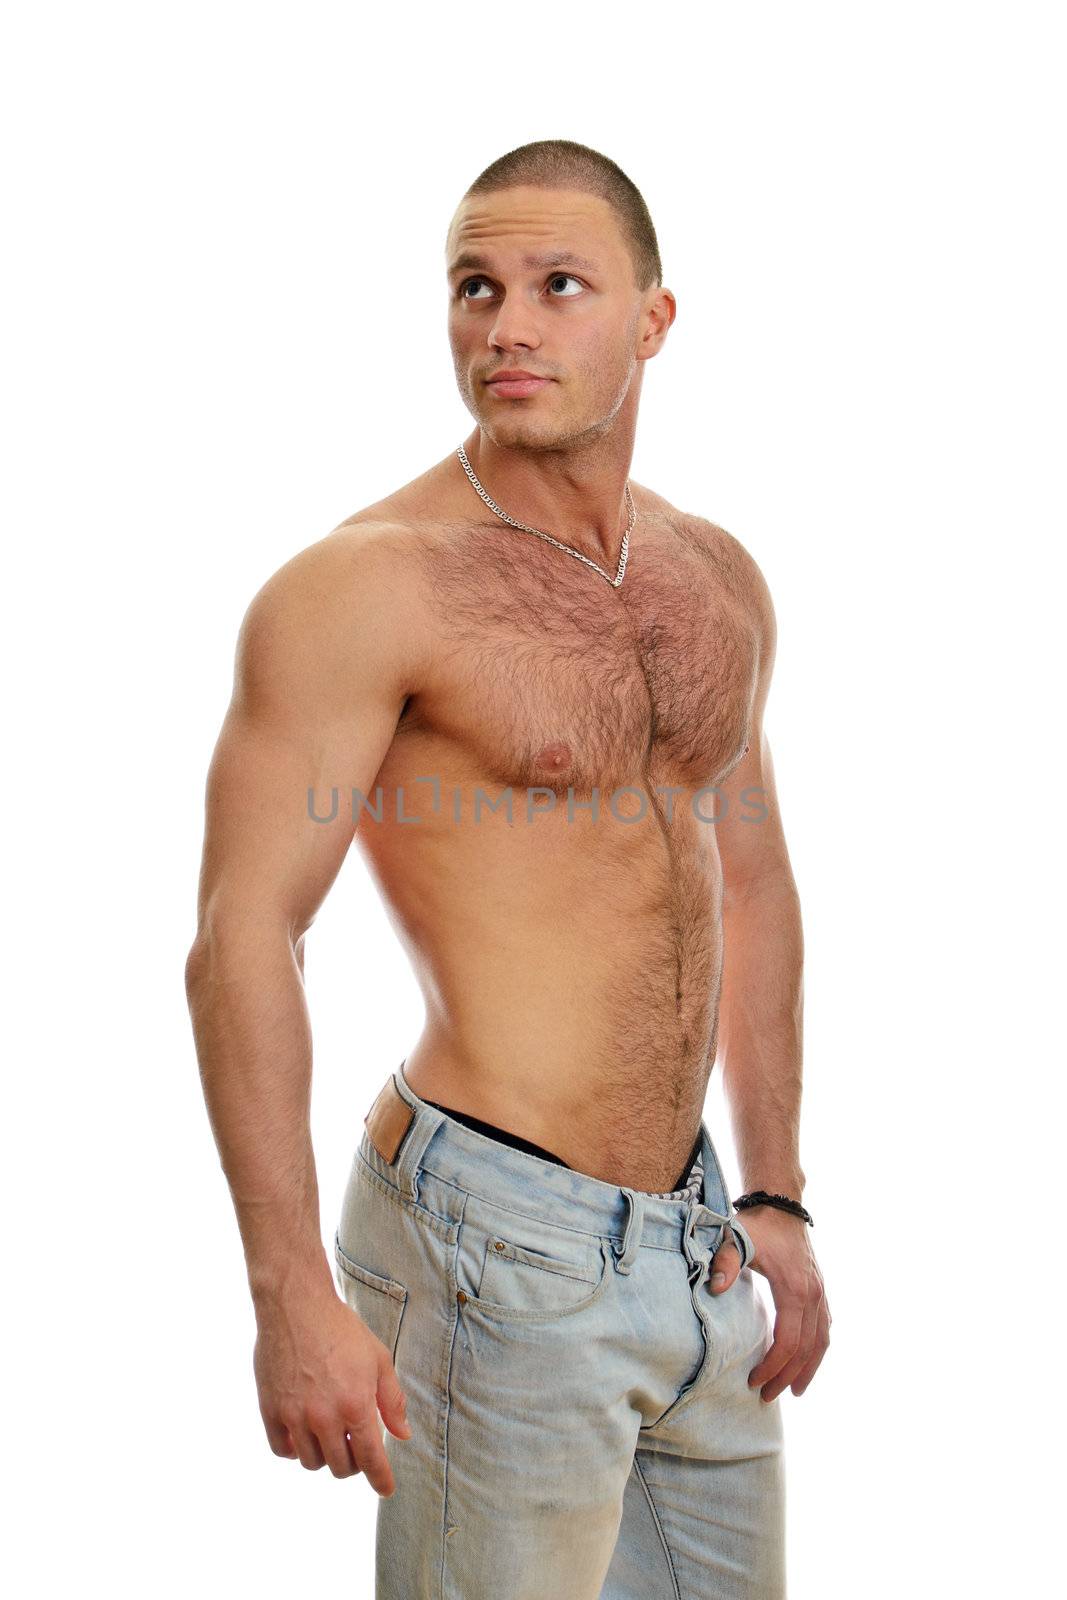 Attractive shirtless male in jeans, isolated on white